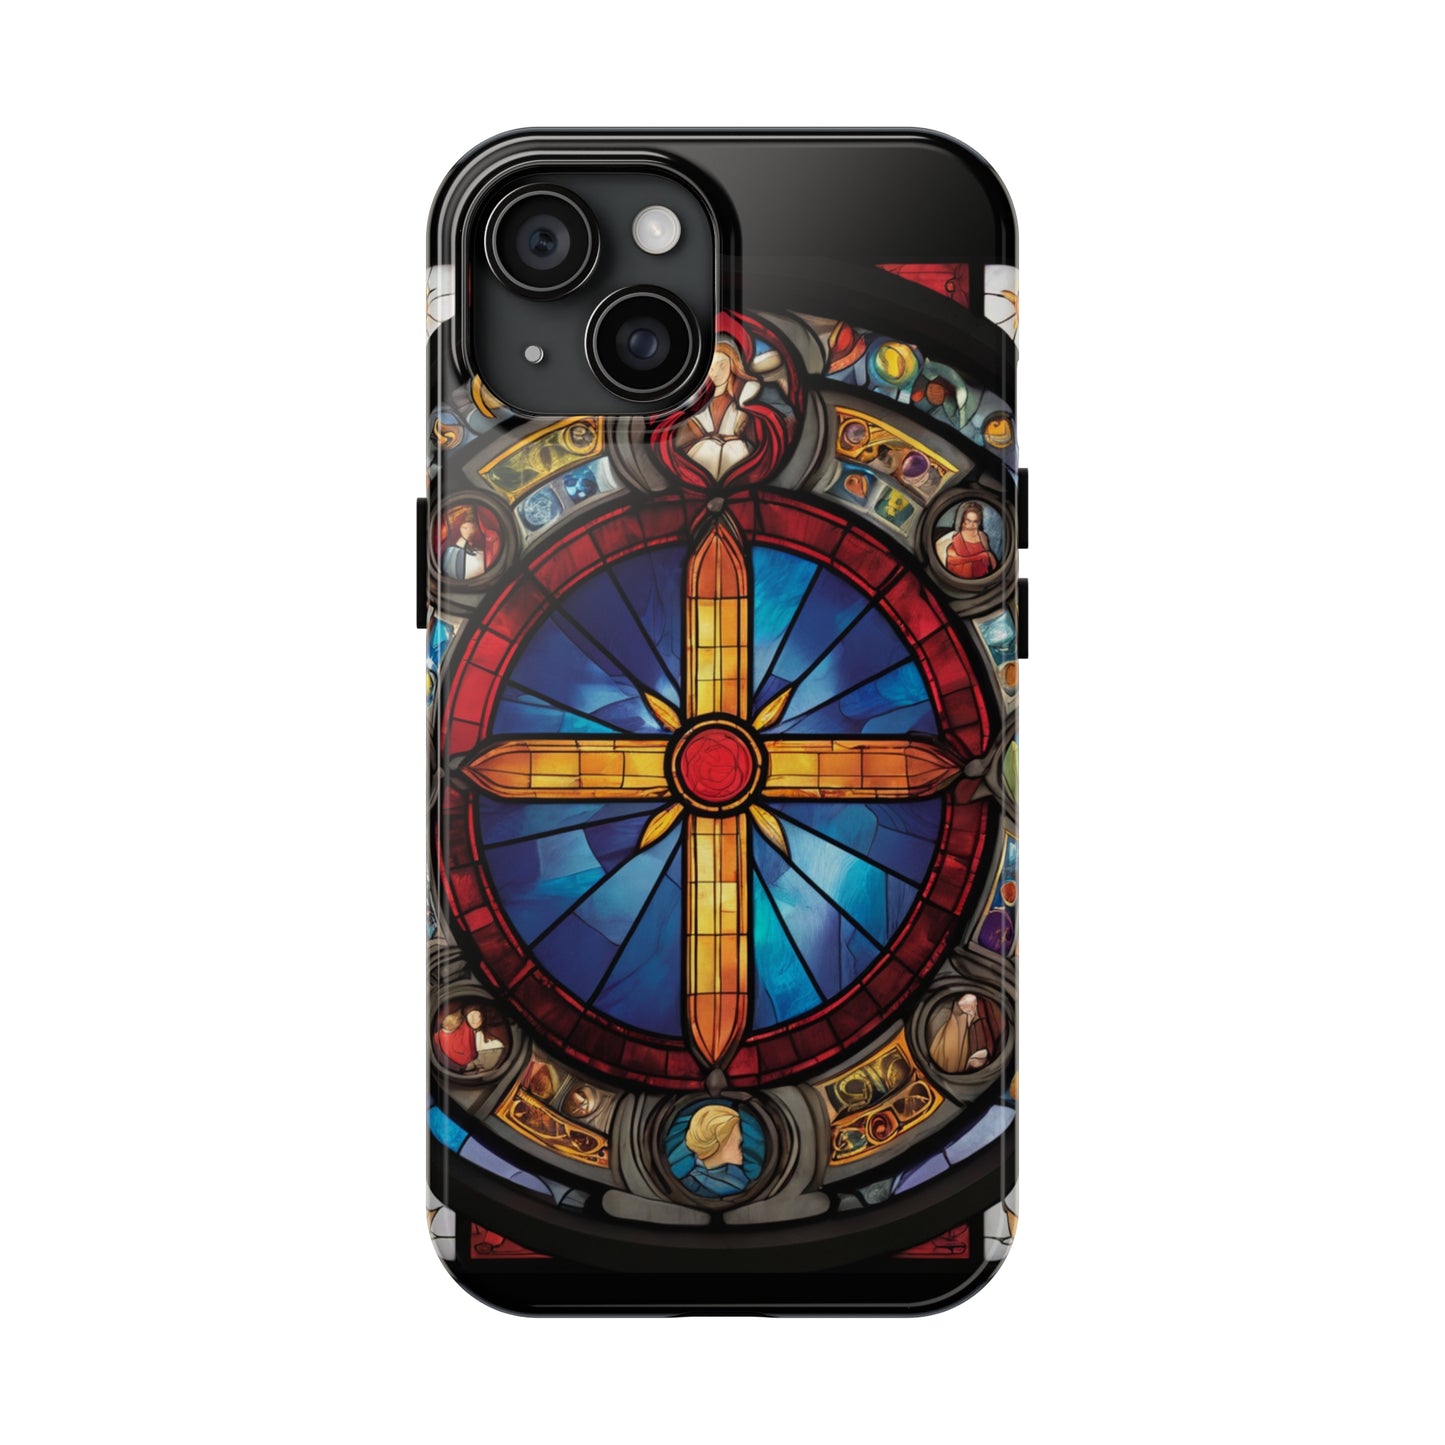 phone case religious iphone samsung Tough Phone Cases cross jesus stained glass